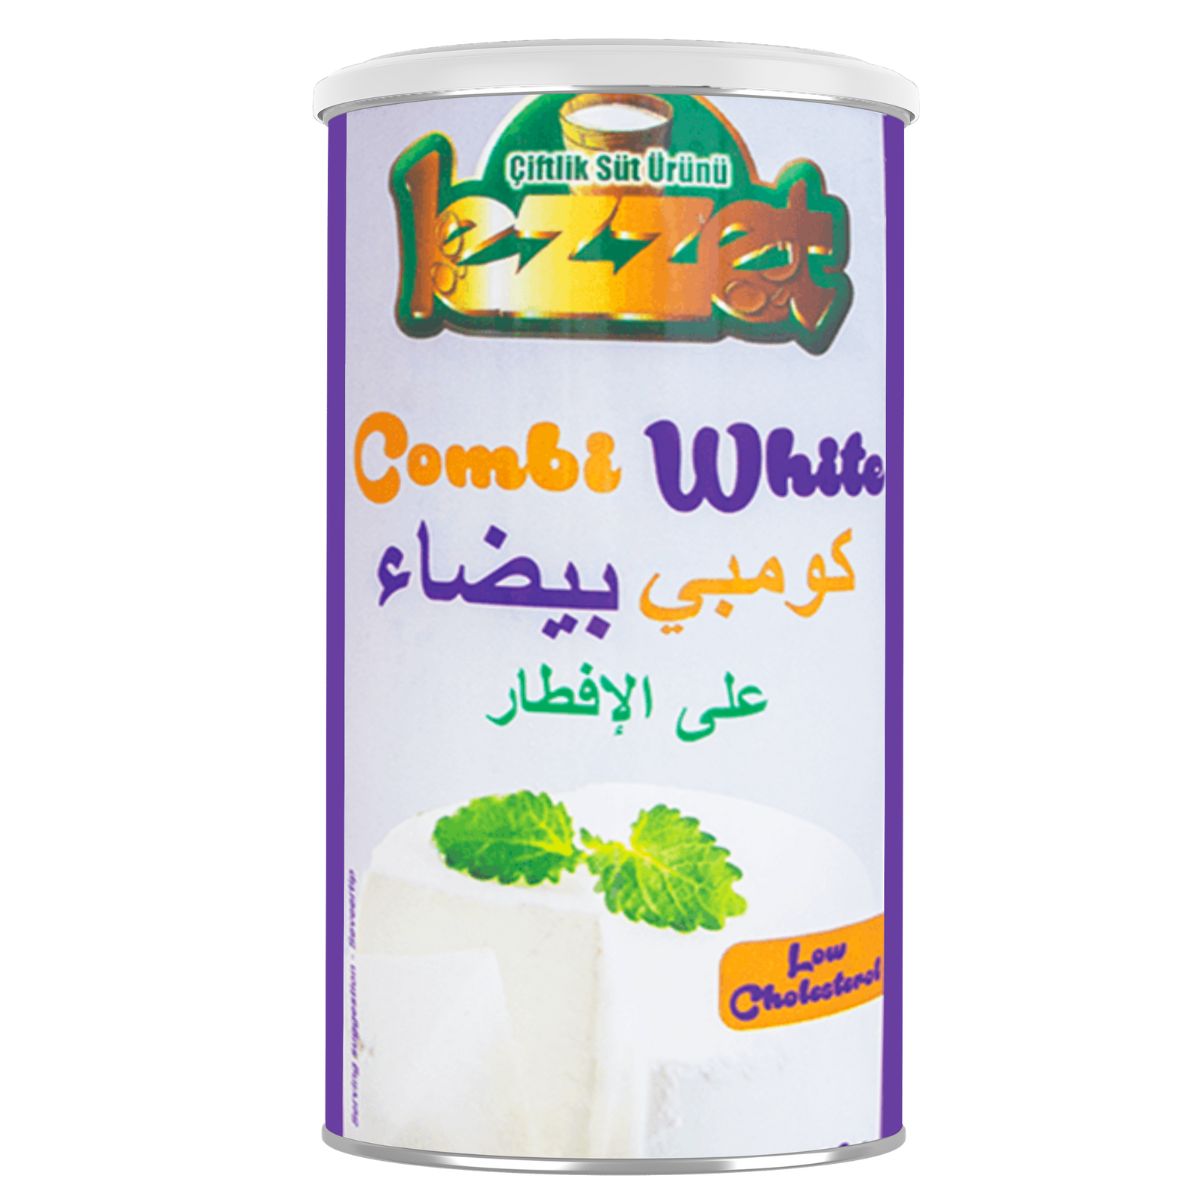 A tin of Lezzet - Combi White Cheese - 800g with mint leaves on it.